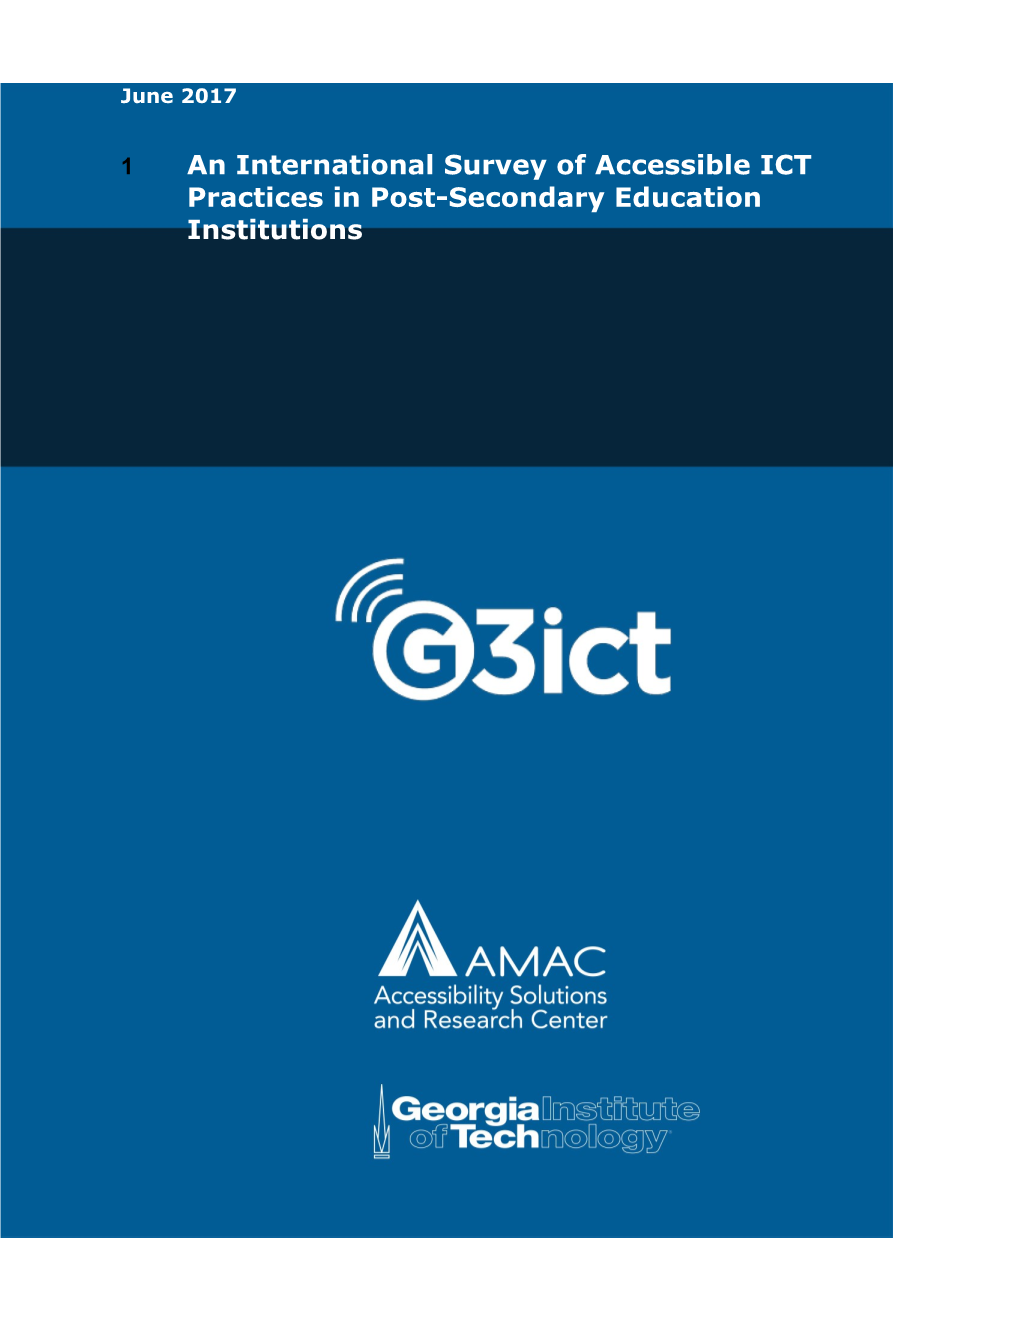 An International Survey of Accessible ICT Practices in Post-Secondary Education Institutions